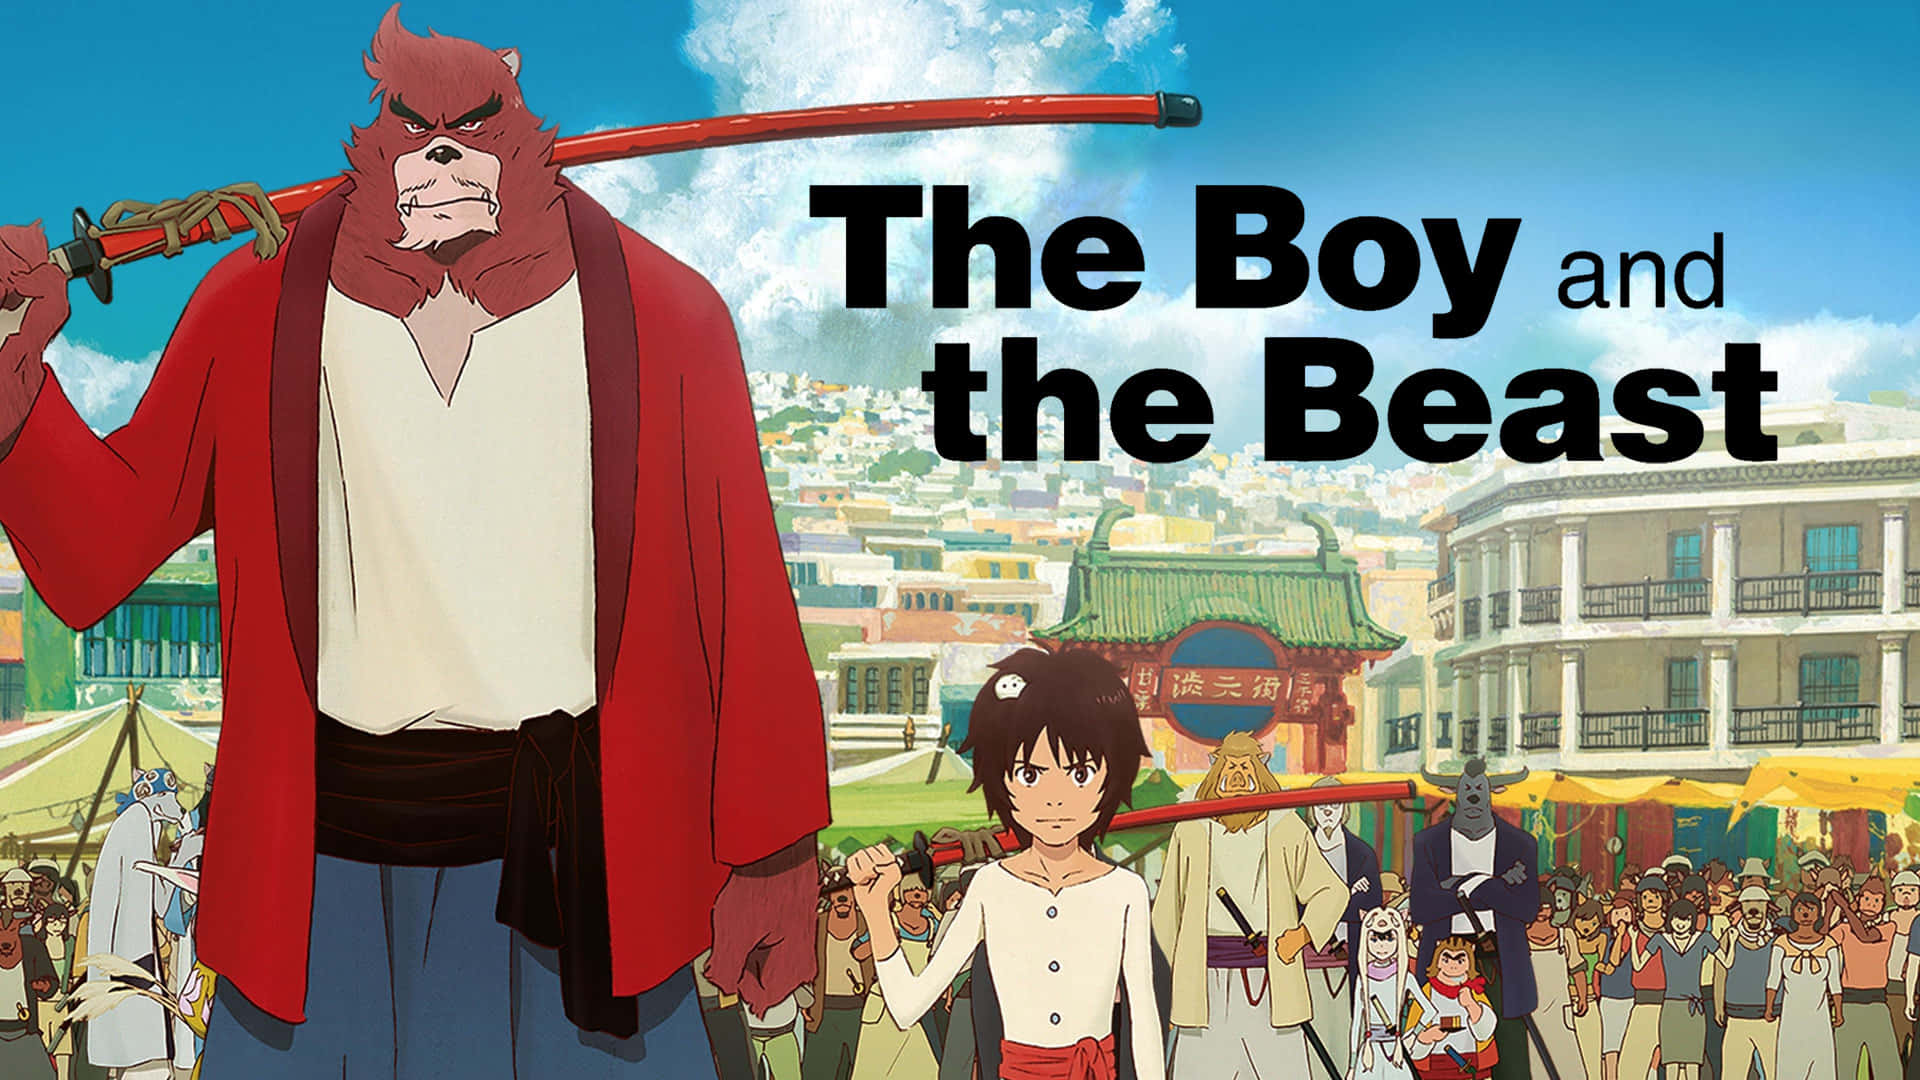 A boy and a beast journey together in The Boy and The Beast. Wallpaper